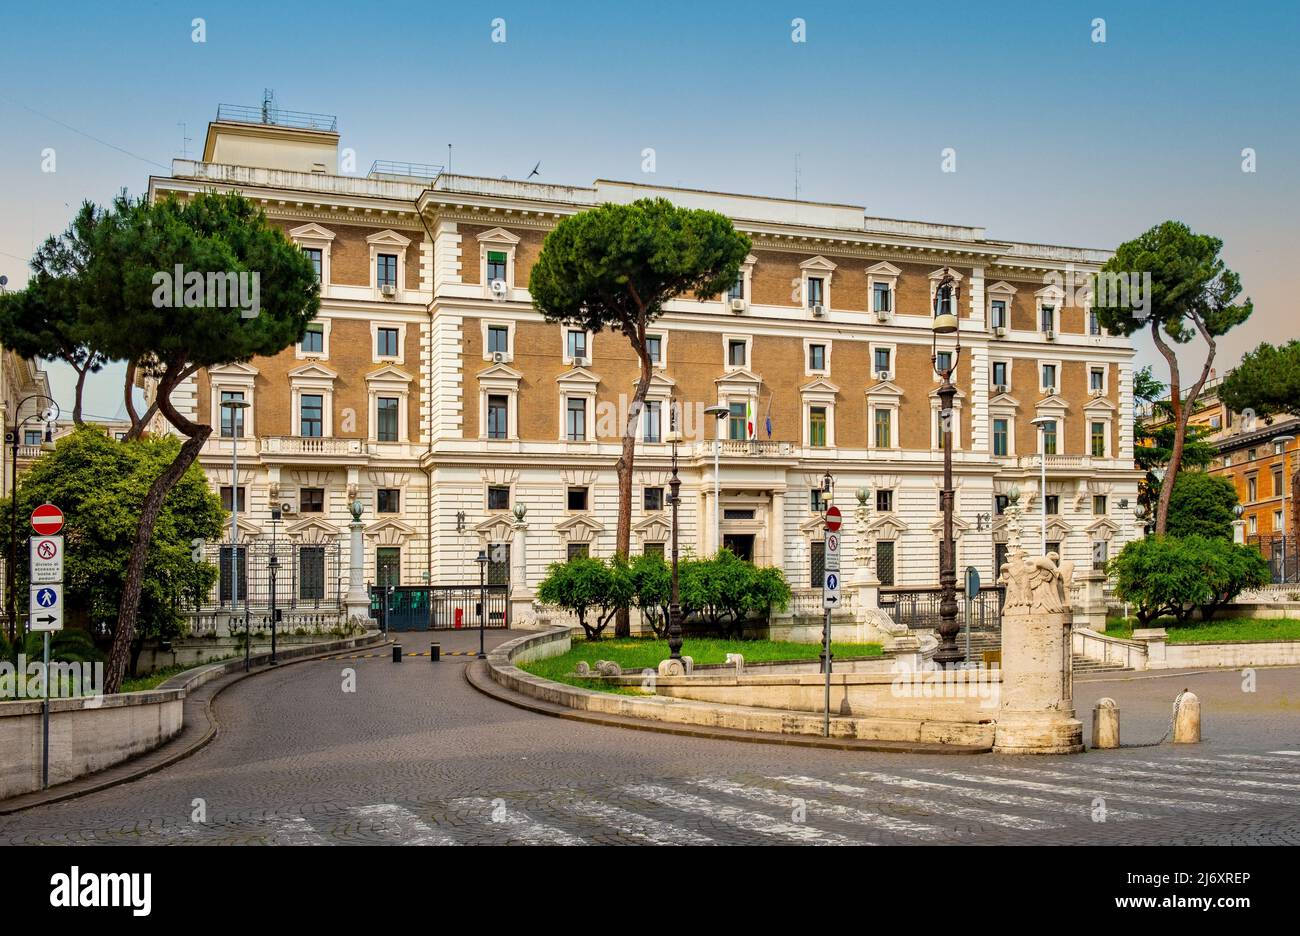 Rome, Italy - May 27, 2018: Palazzo del Viminale palace, Ministry of Interior headquarter at Piazza Viminale square in Quirinale quarter of historic R Stock Photo